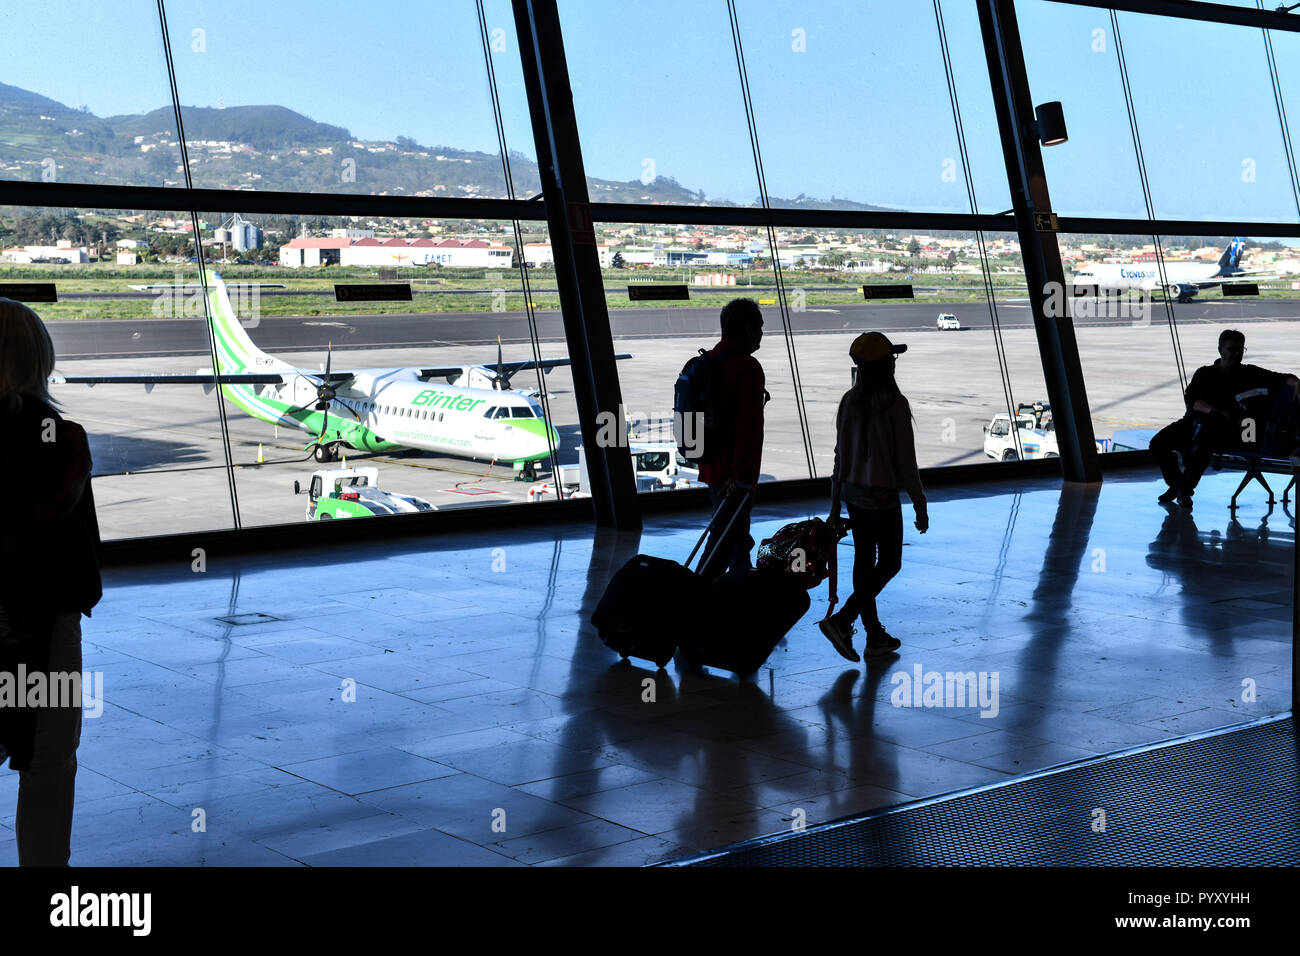 Spain; Canary Islands: Tenerife. Tenerife North Airport. Silhouette of passengers in the terminal and plane of the Spanish airline Binter Canarias, op Stock Photo